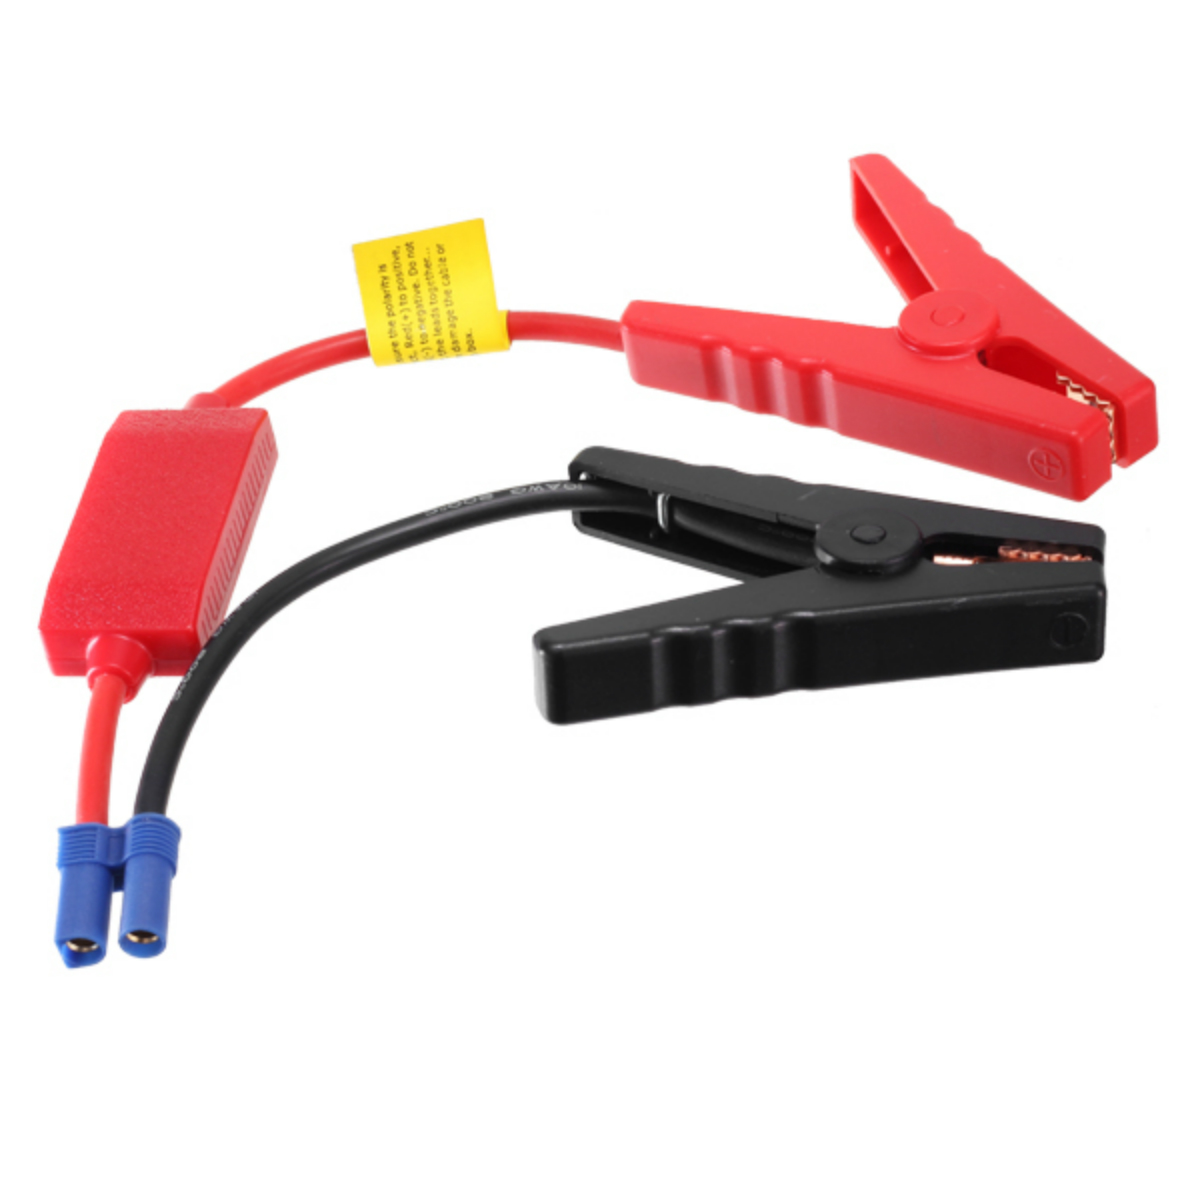 

12V Clamp Clip Emergency Lead Cable for Car Trucks Jump Starter Battery Power Bank